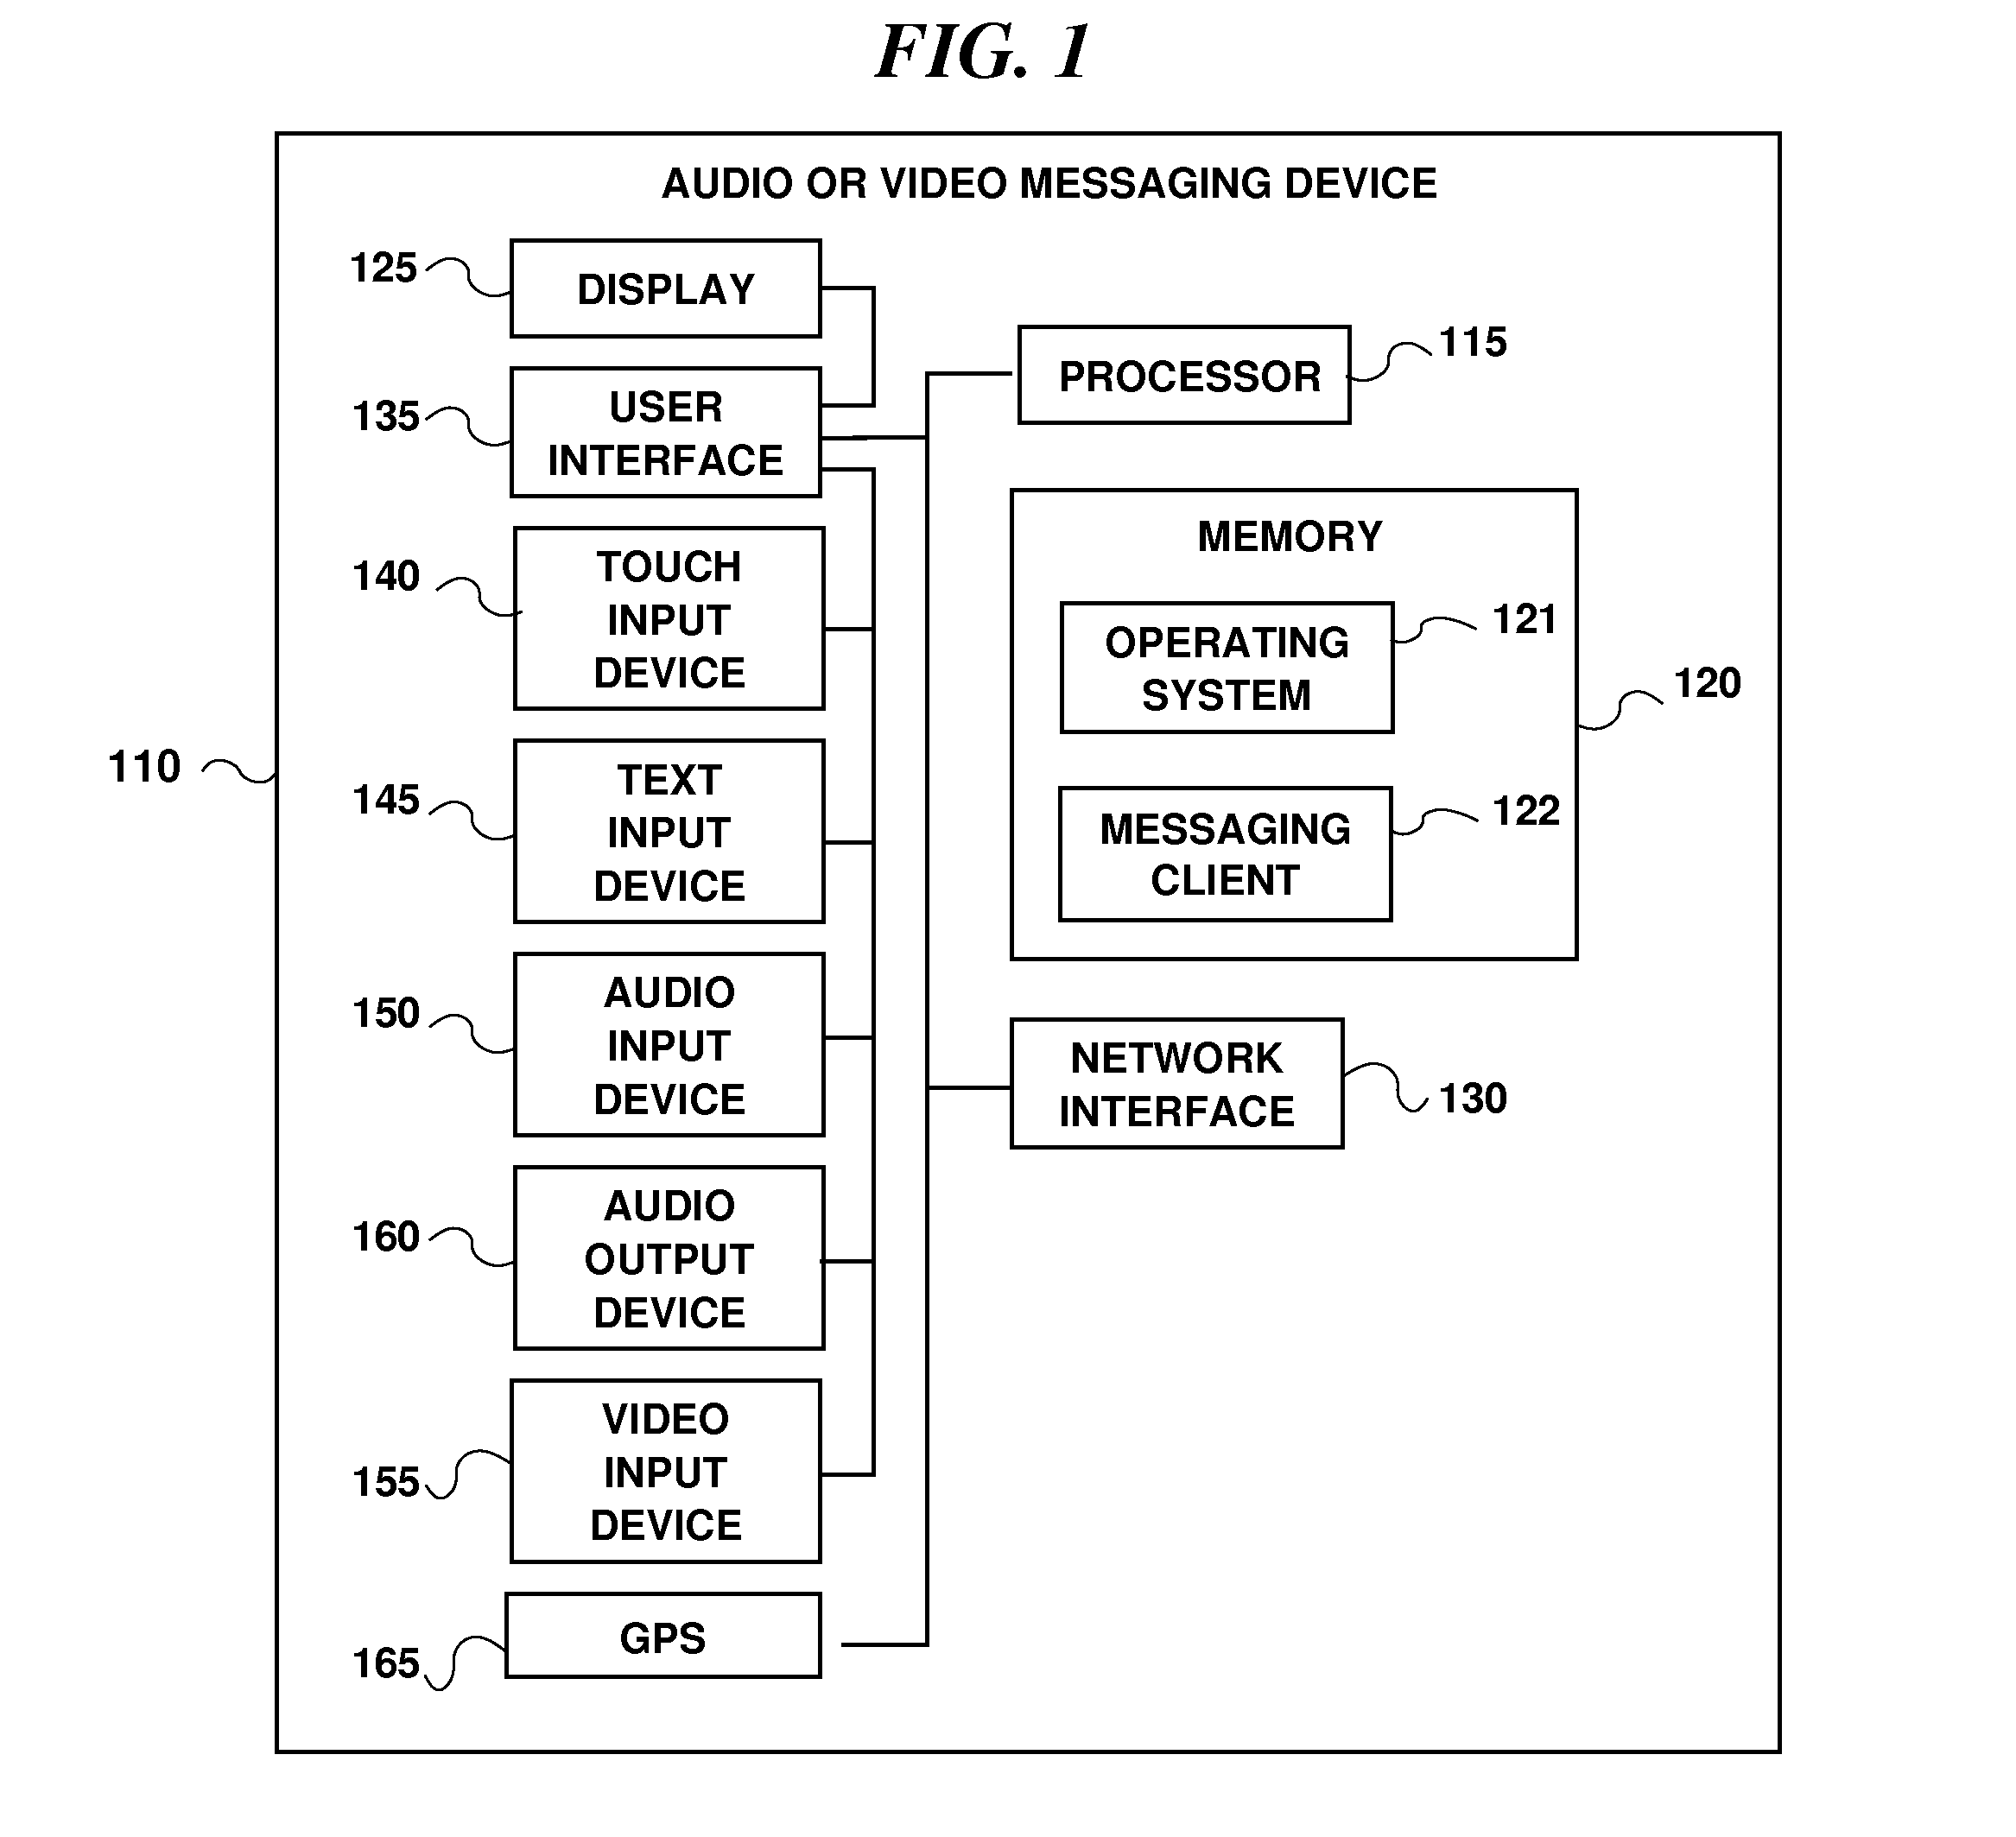 System and Method for Remotely Directed Filtering and Sorting of Near Real-Time Audio or Video Messages